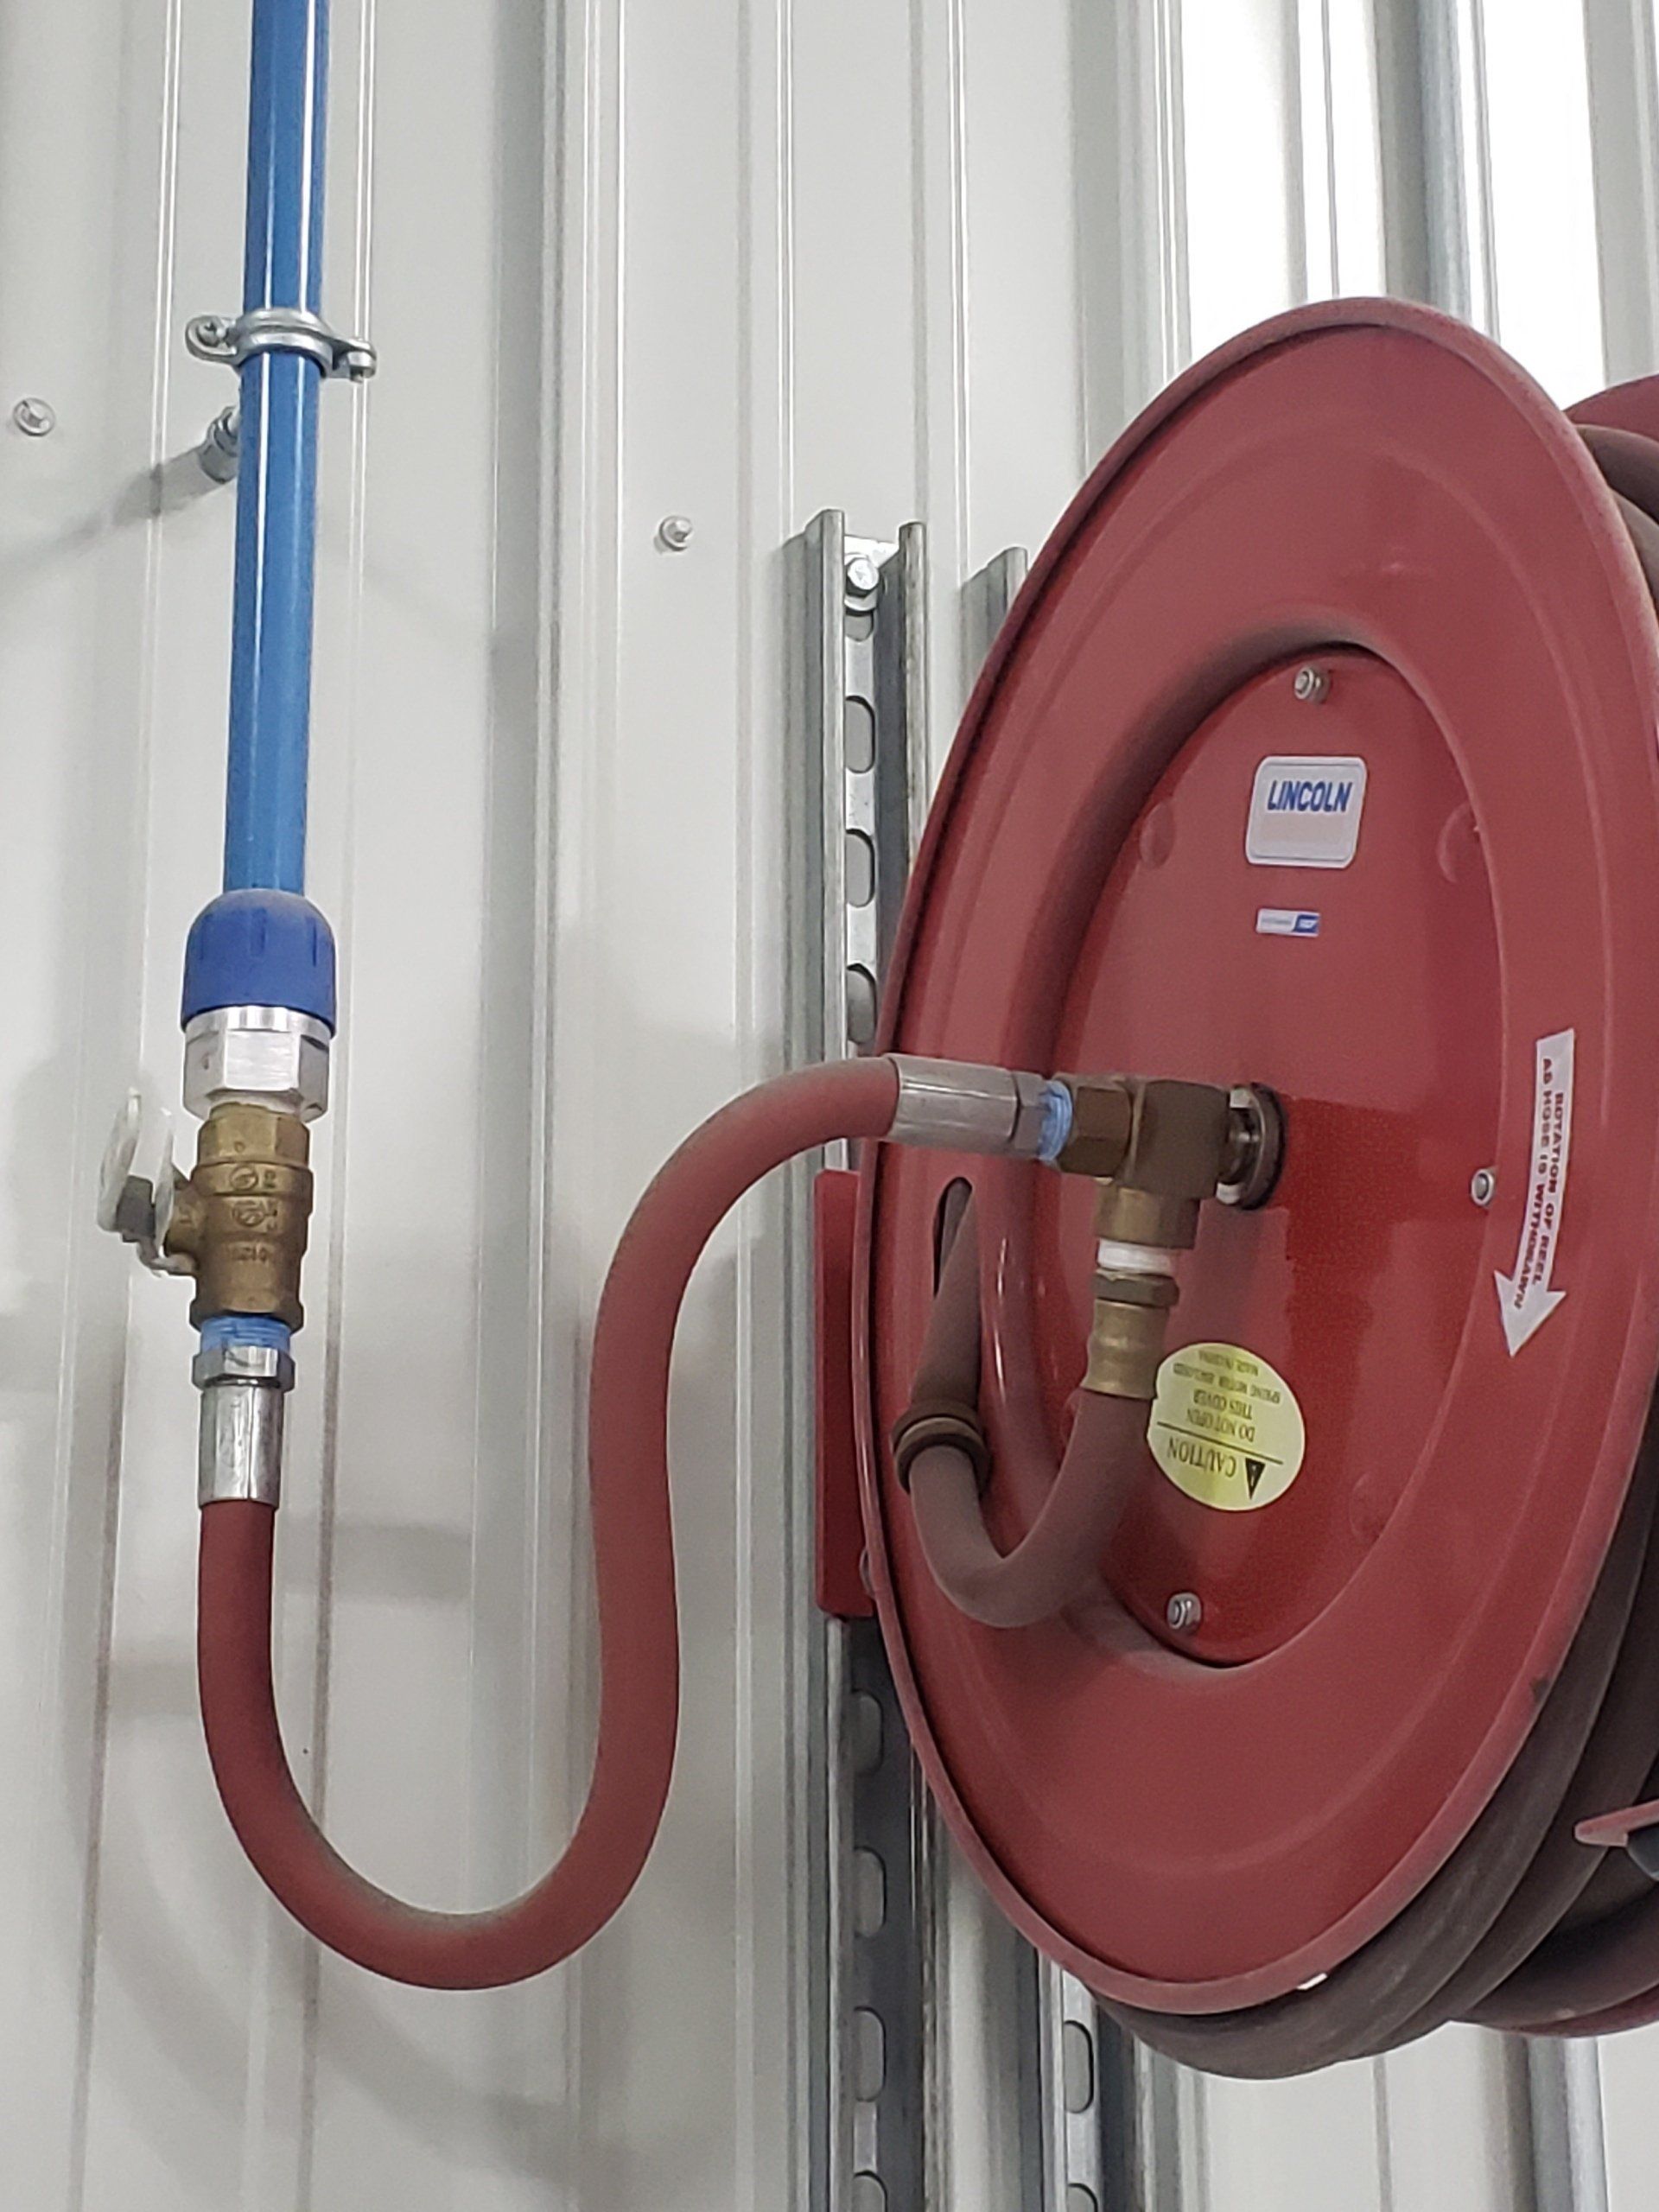 RapidAir Compressed Air Piping Systems | Premium Air Compressor Piping | Local RapidAir Factory Representative and Installer